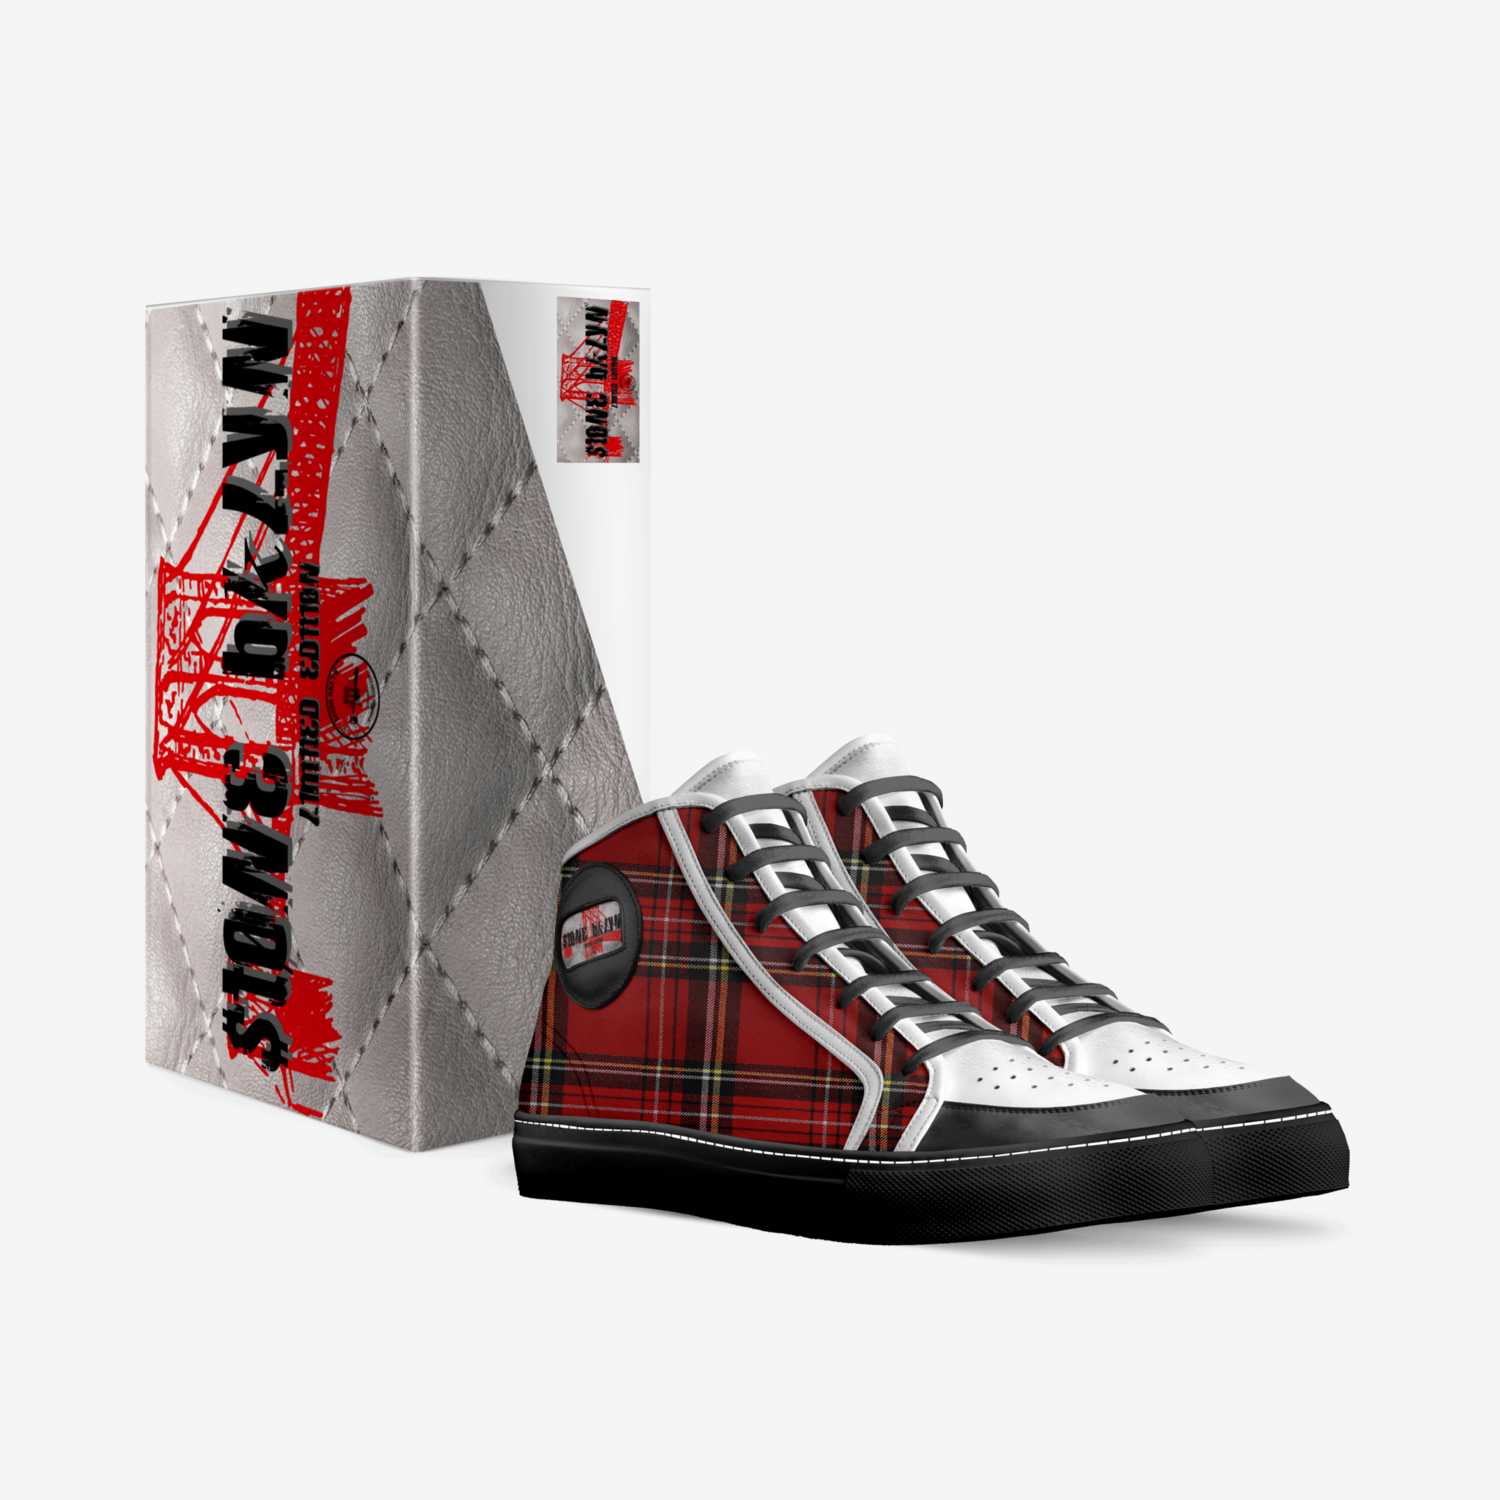 Anarchy in the NYC custom made in Italy shoes by Kevin Marron | Box view